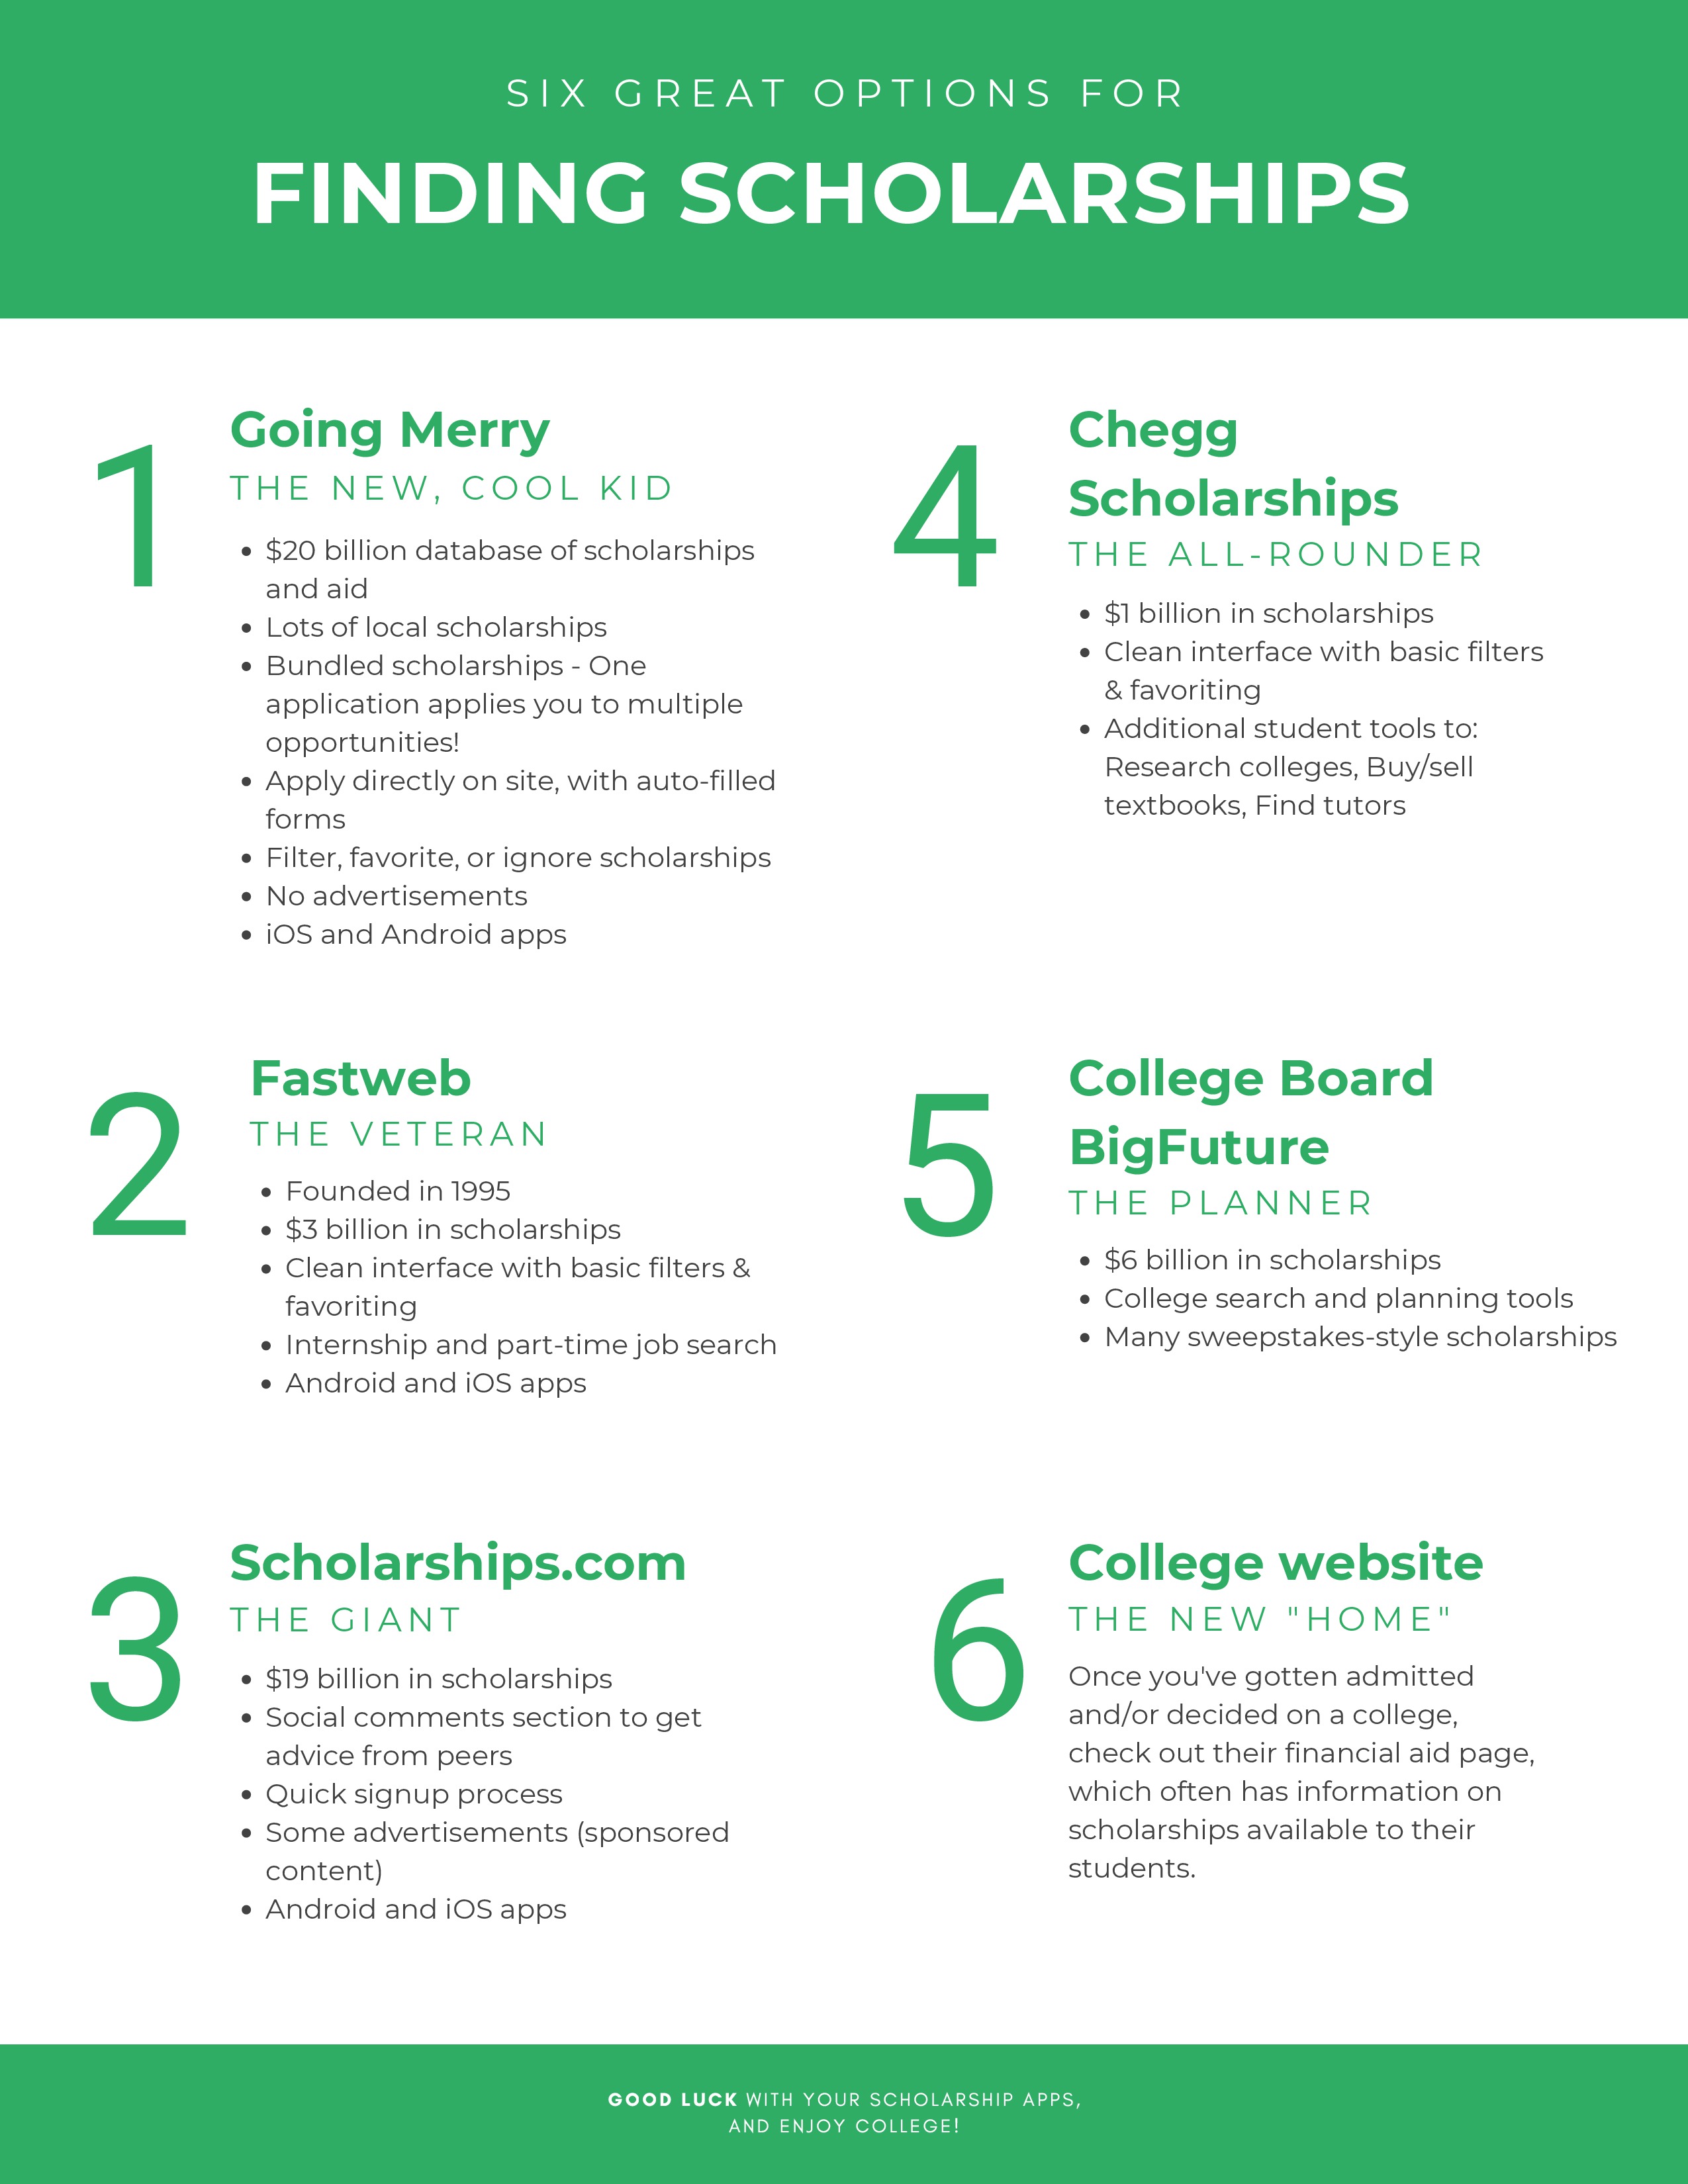 Six great ways to finding scholarships 